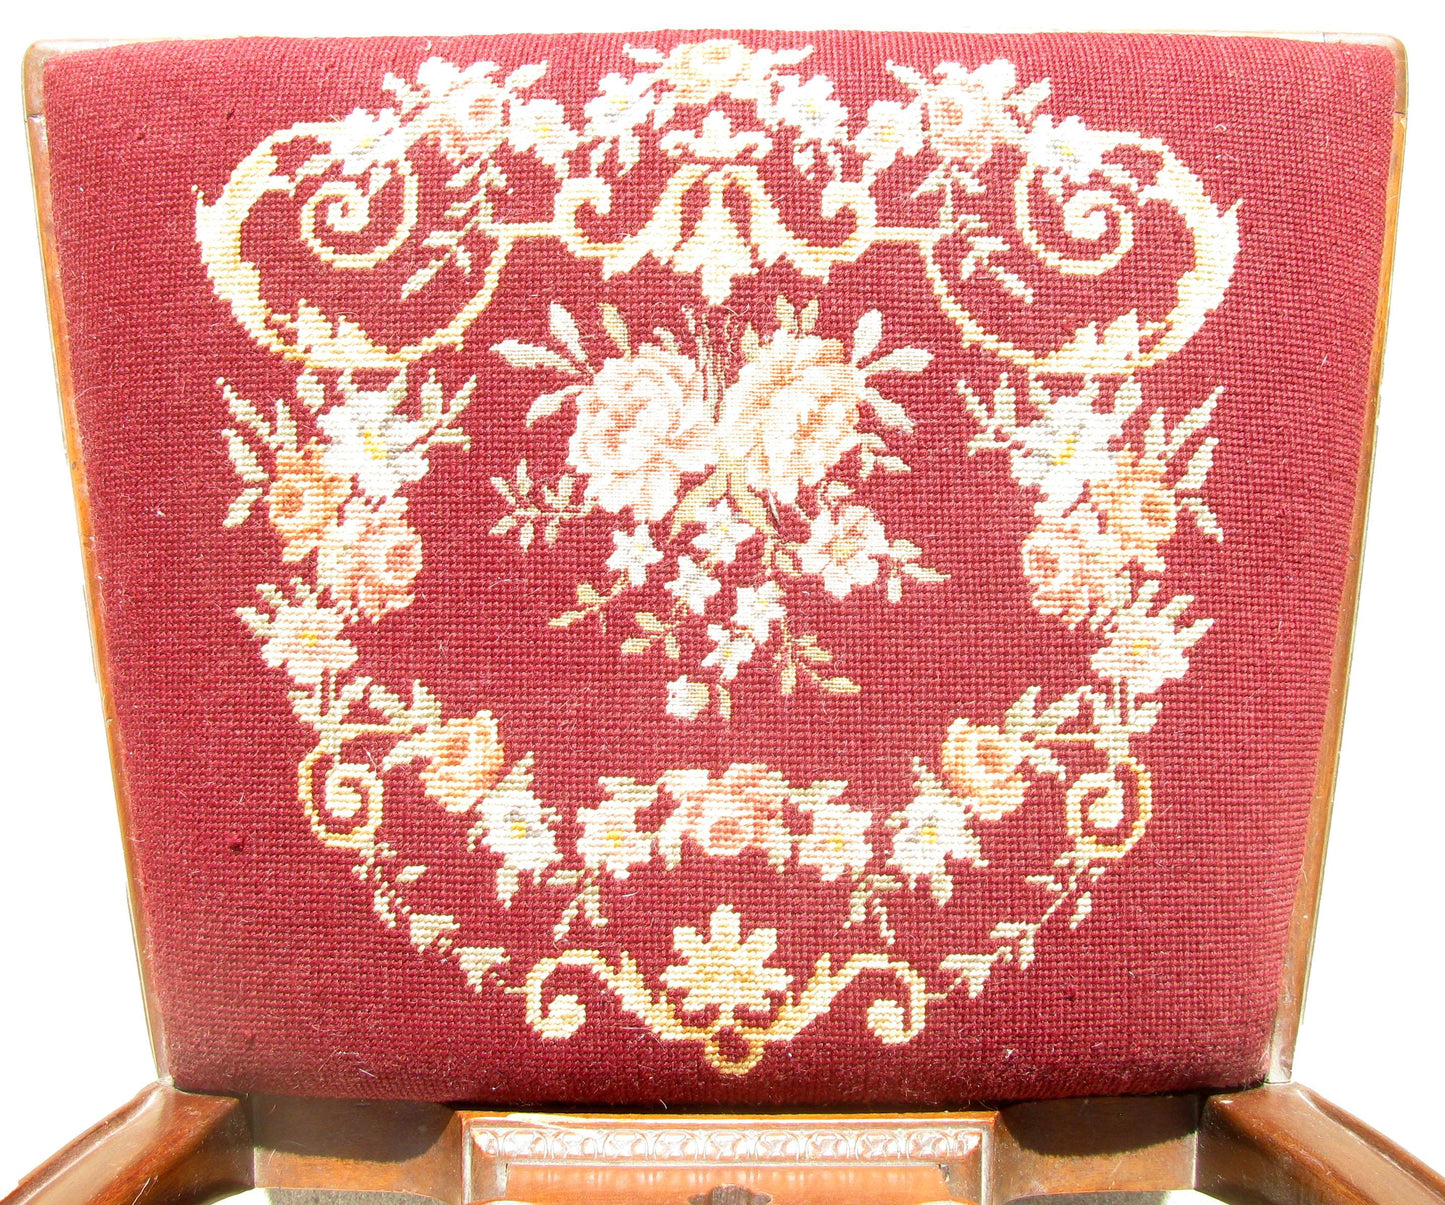 19th C. Antique English Chippendale Ball & Claw / Needlepoint Accent Chair